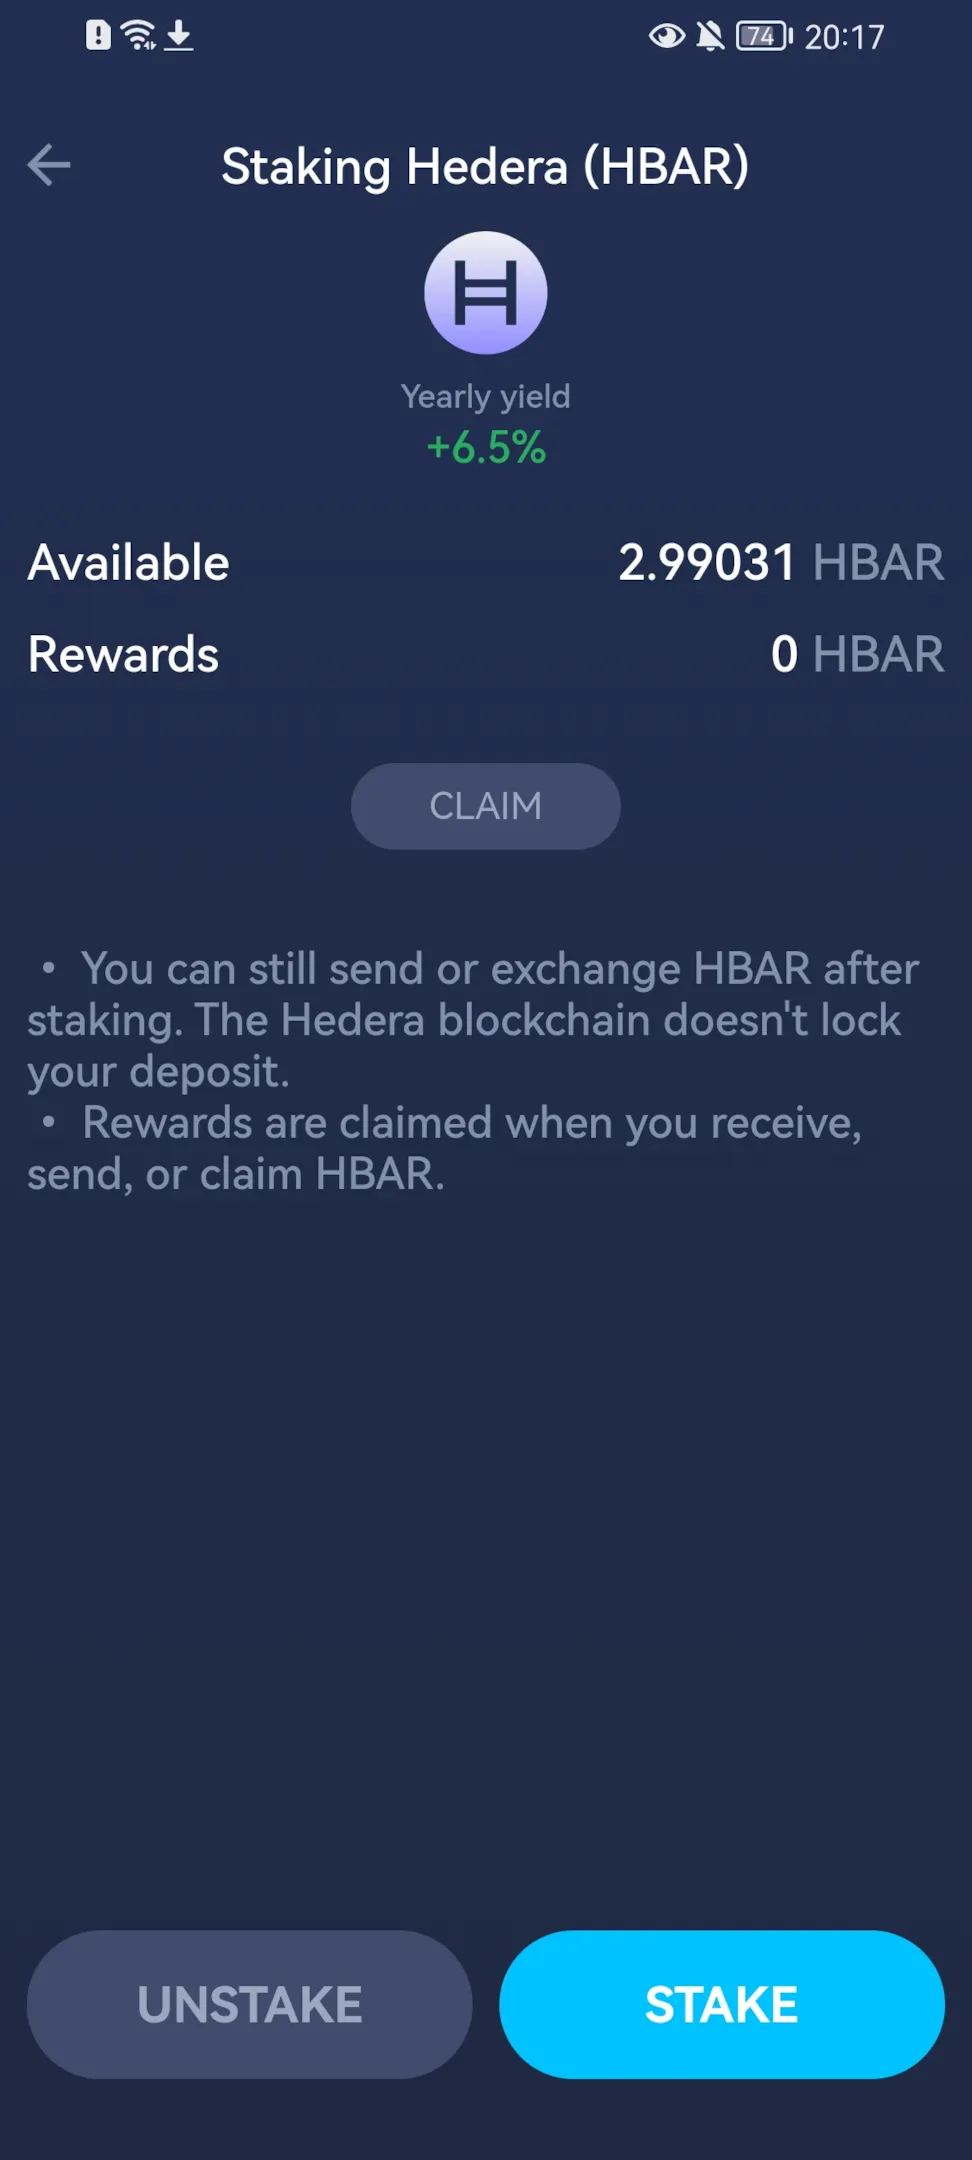 HBAR staking interface in the mobile version of Atomic Wallet